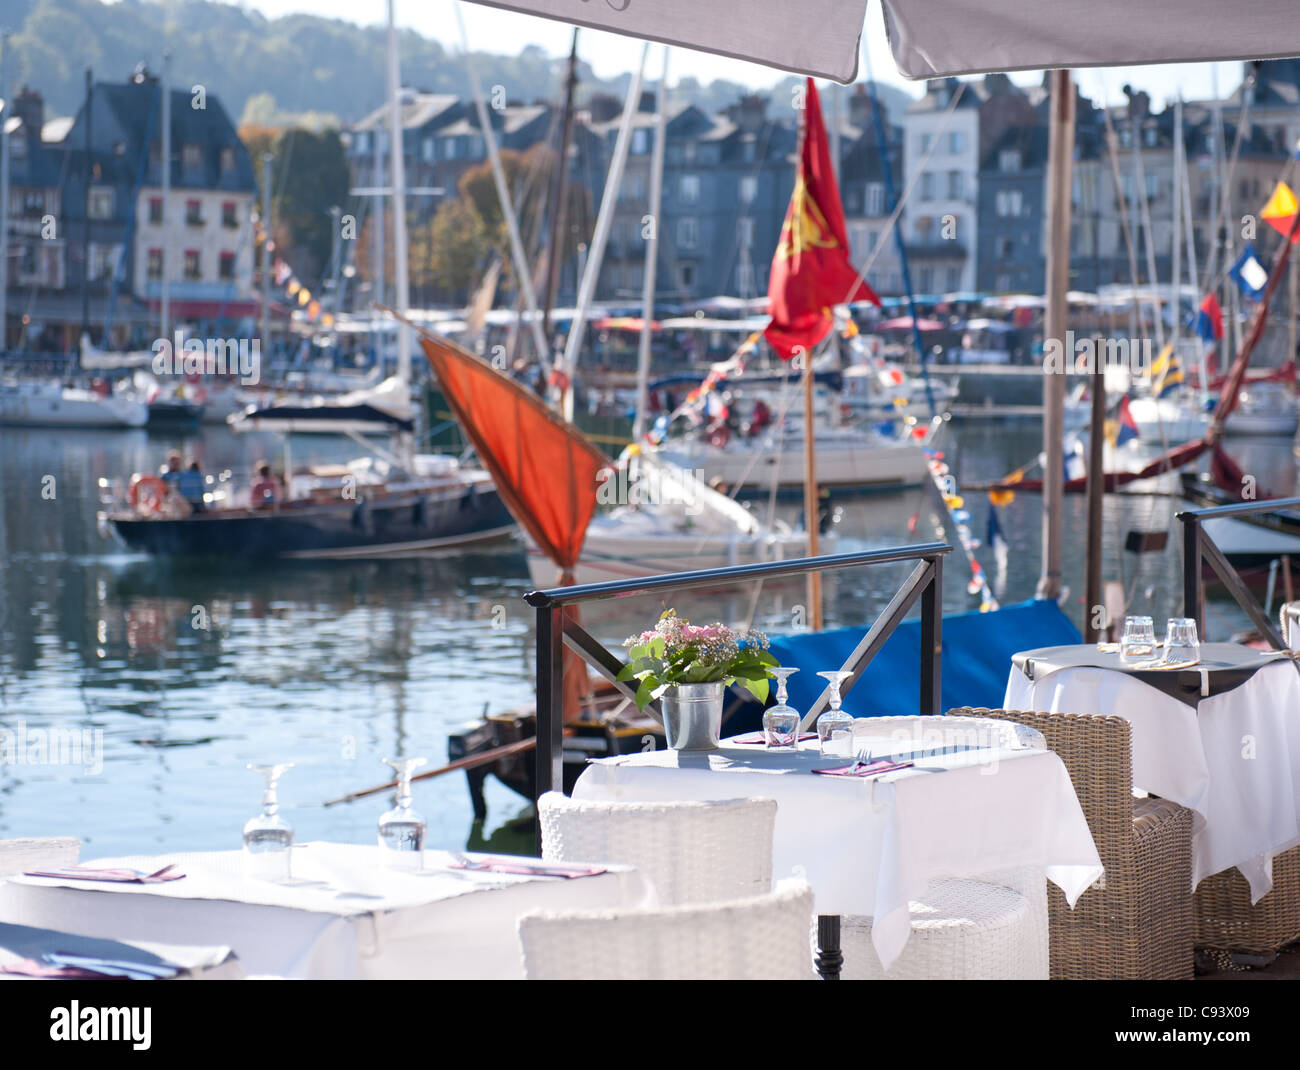 Restaurants border the quai St-Catherine at the old port, vieux bassin, of Honfleur in the Calvados dept. of Normandy, France, Stock Photo